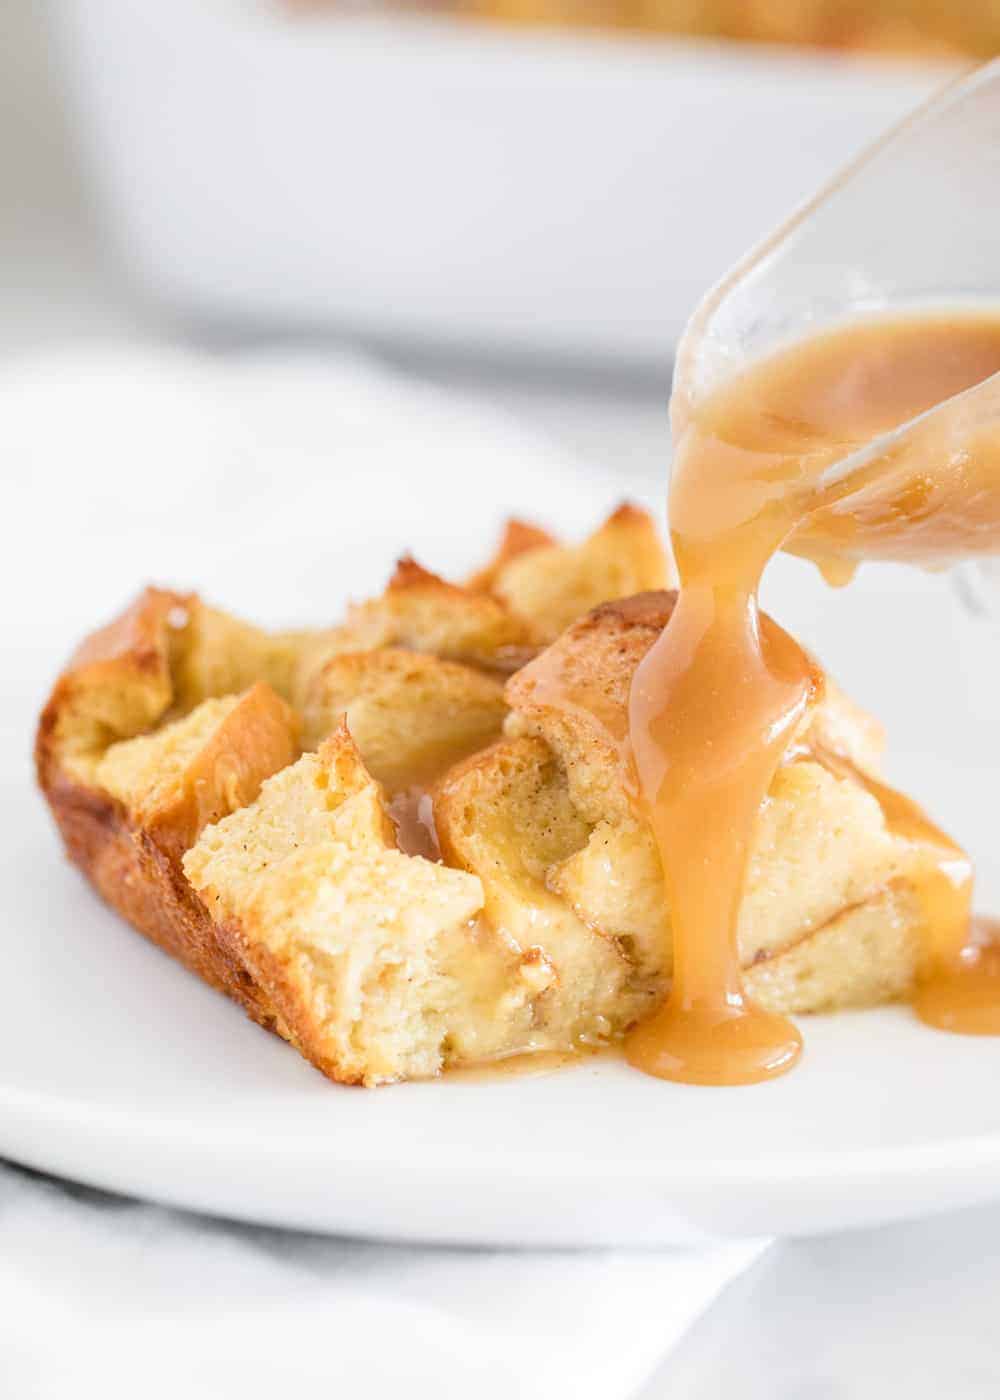 Bread Pudding With Butter Caramel Sauce I Heart Naptime,Crochet Granny Square Patterns